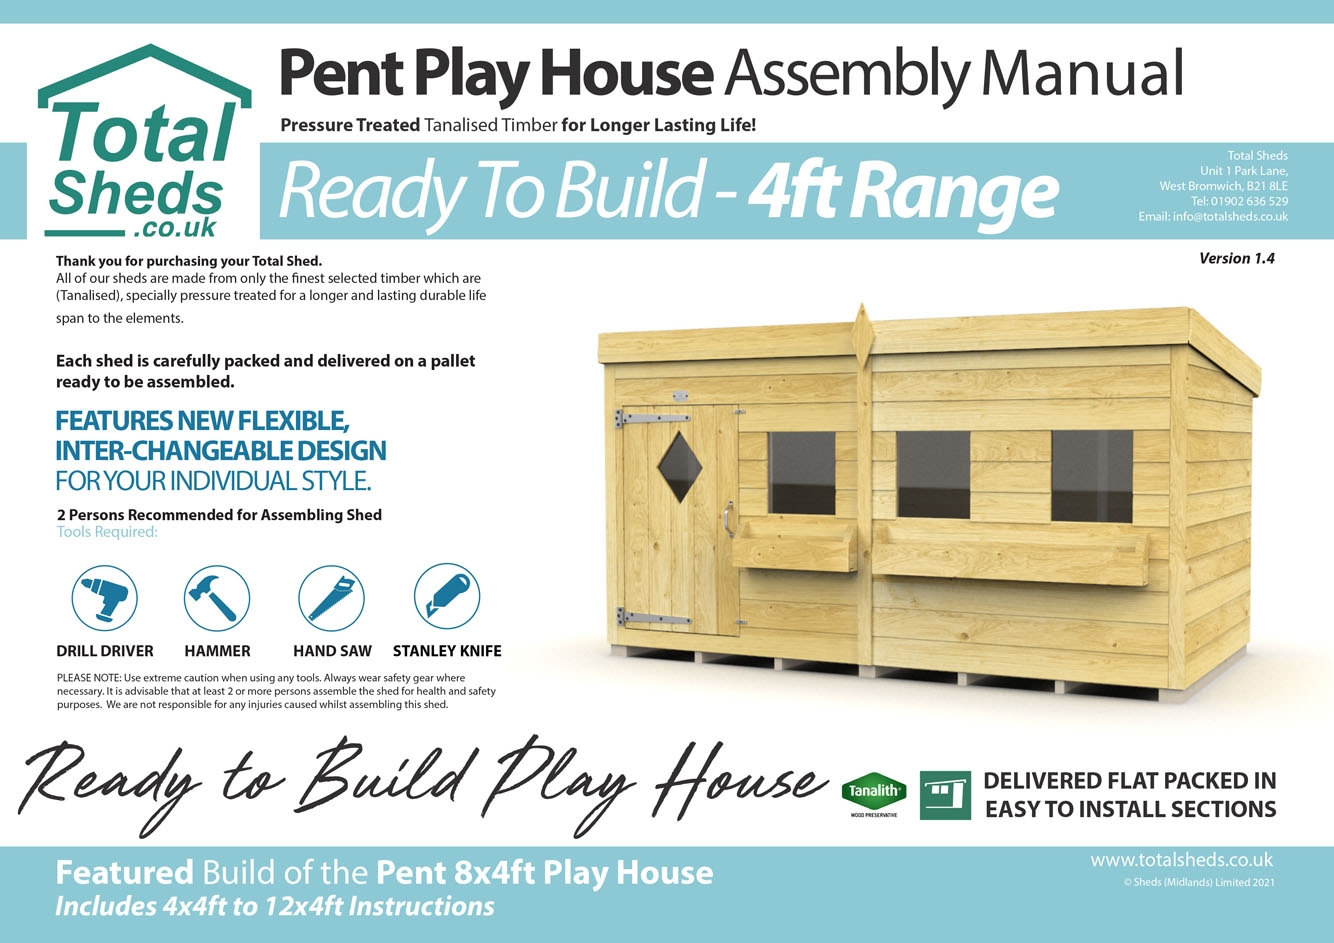 4ft F&F Play House assembly guide